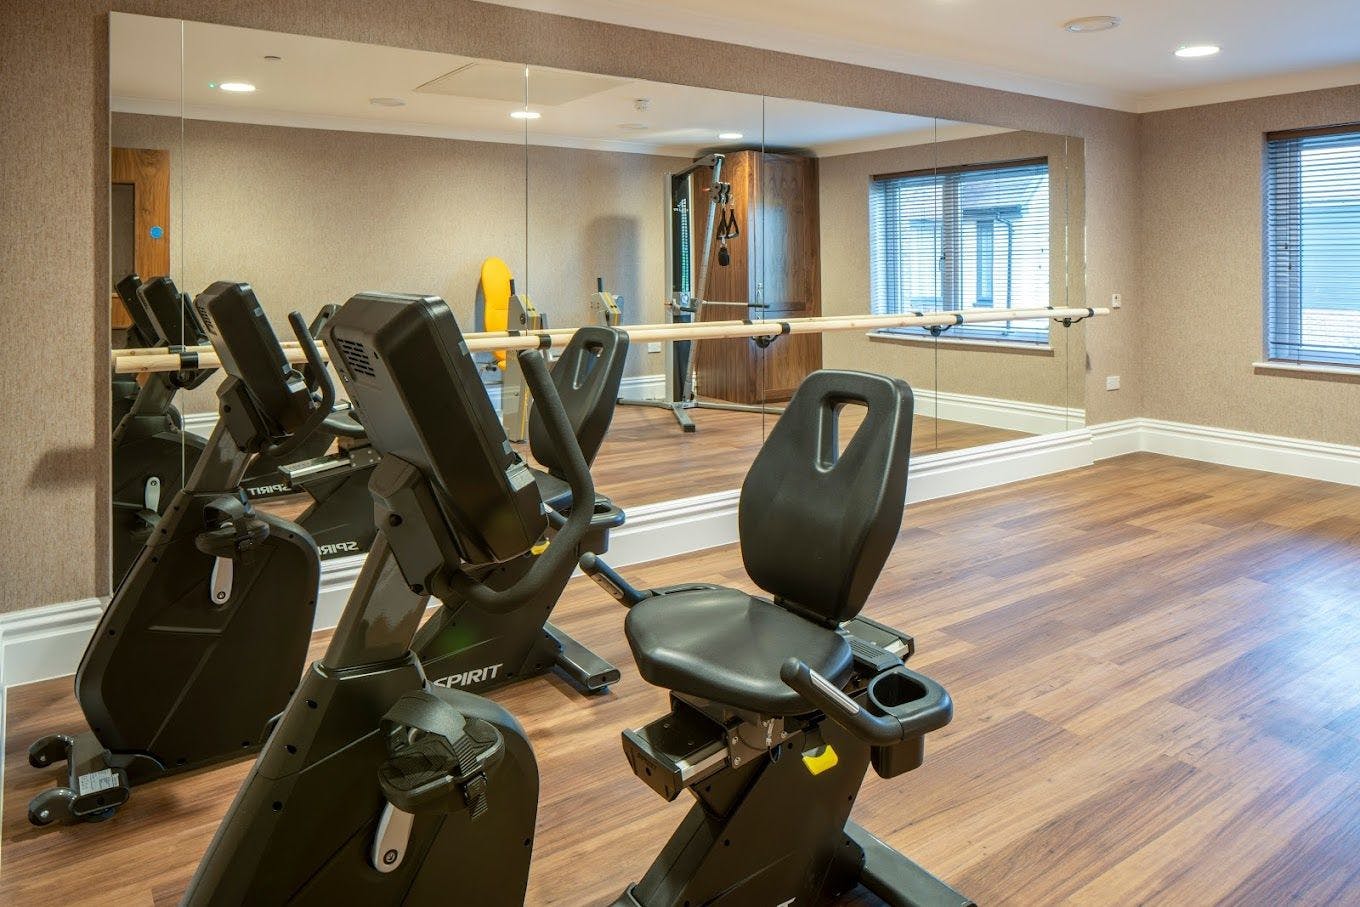 Gym at Cavell Park Care Home in Maidstone, Kent